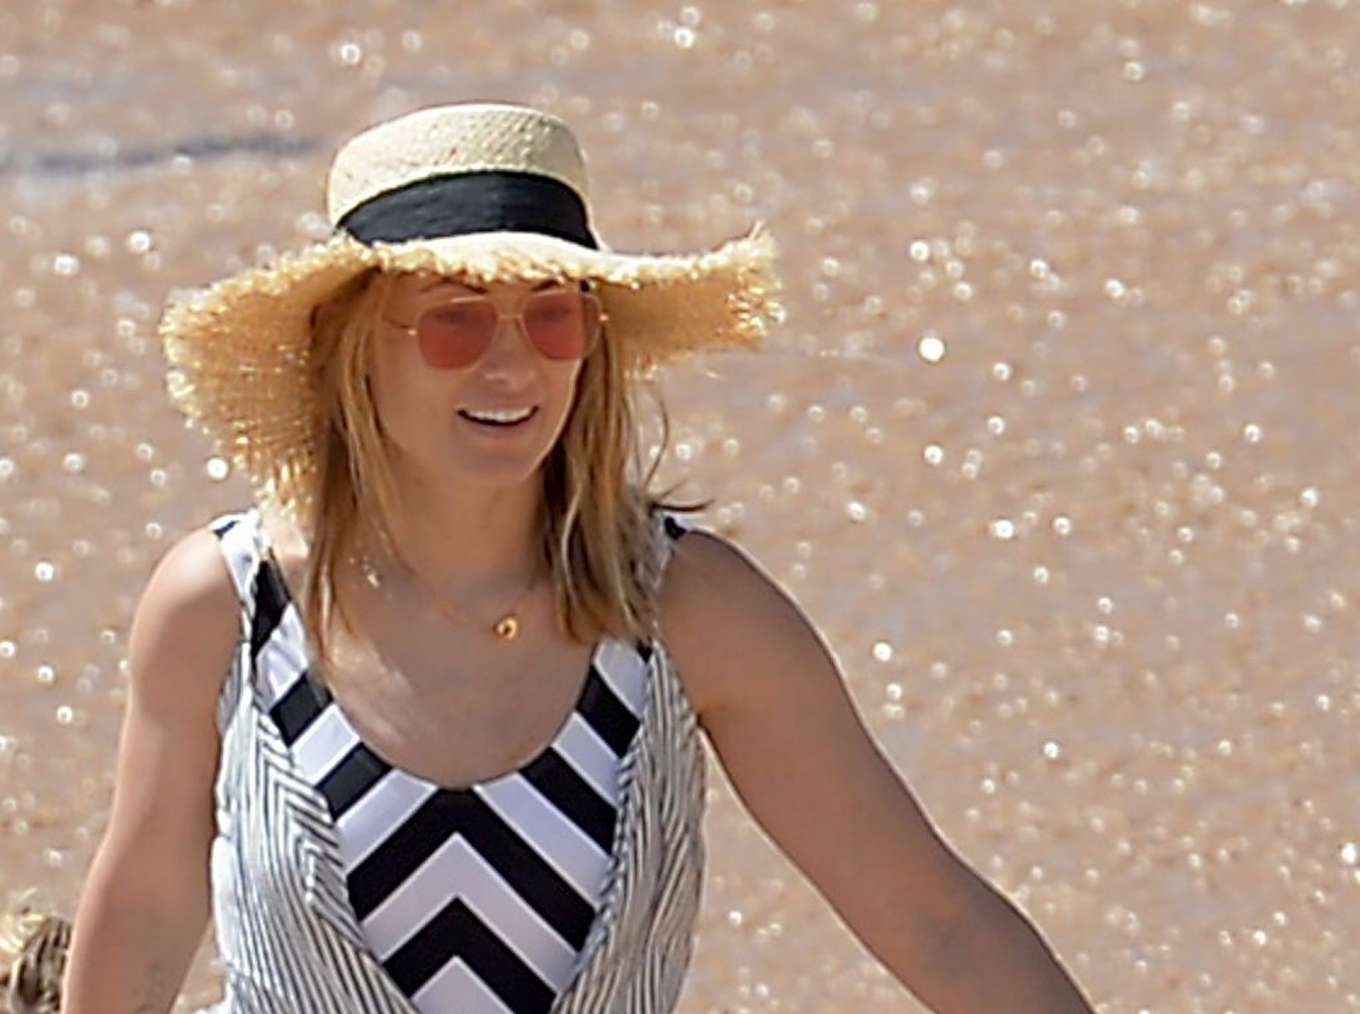 Olivia Wilde was spotted on a Maui beach in Hawaii